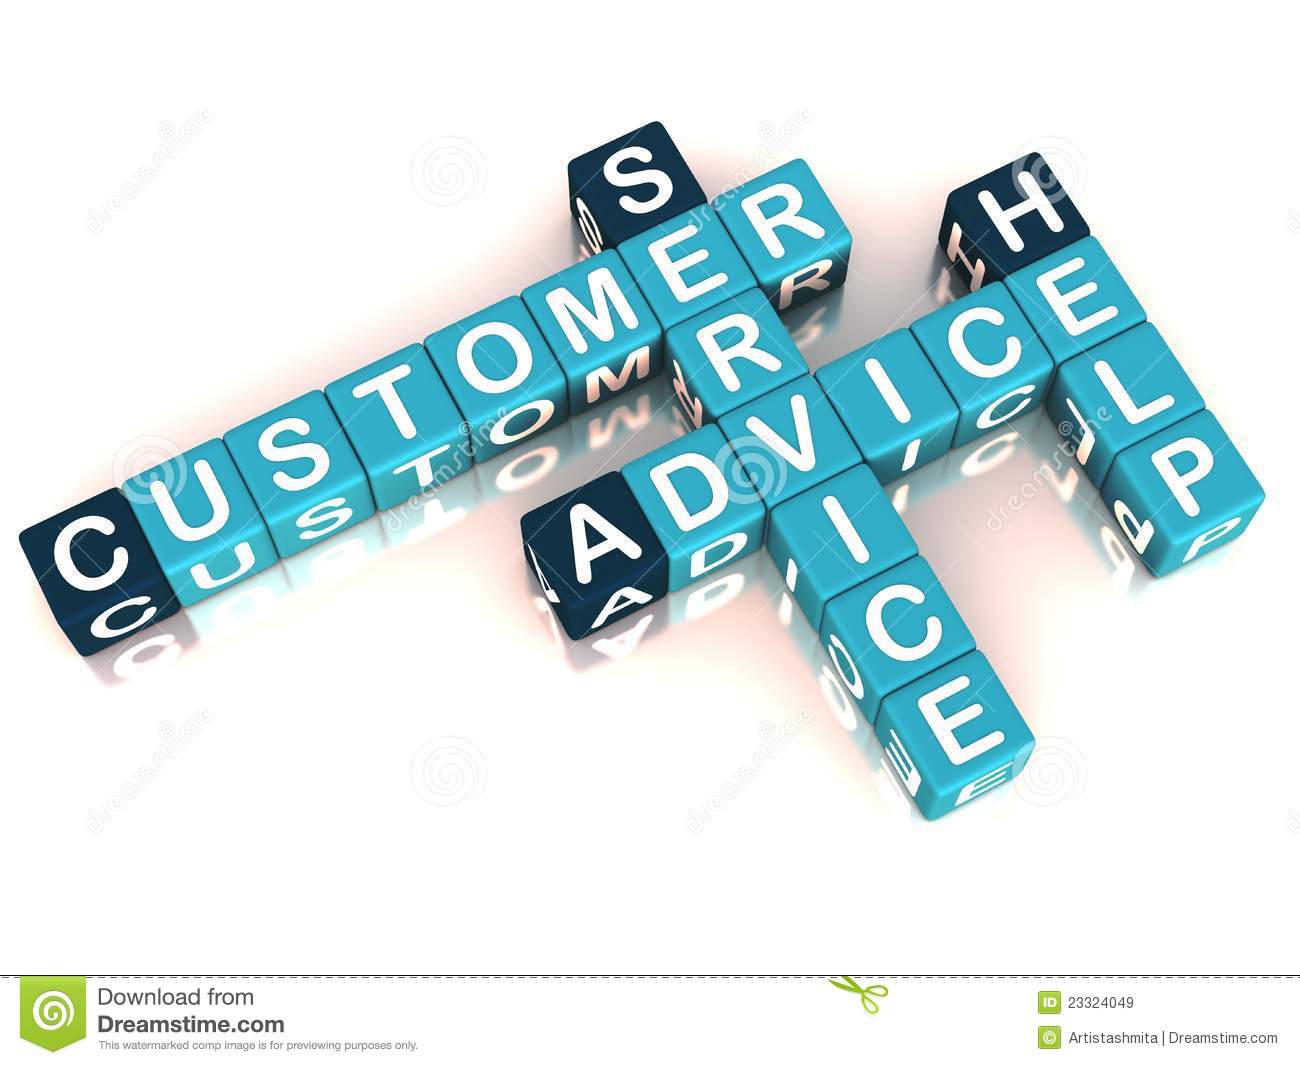 Customer Service Royalty Free Stock Images   Image  23324049